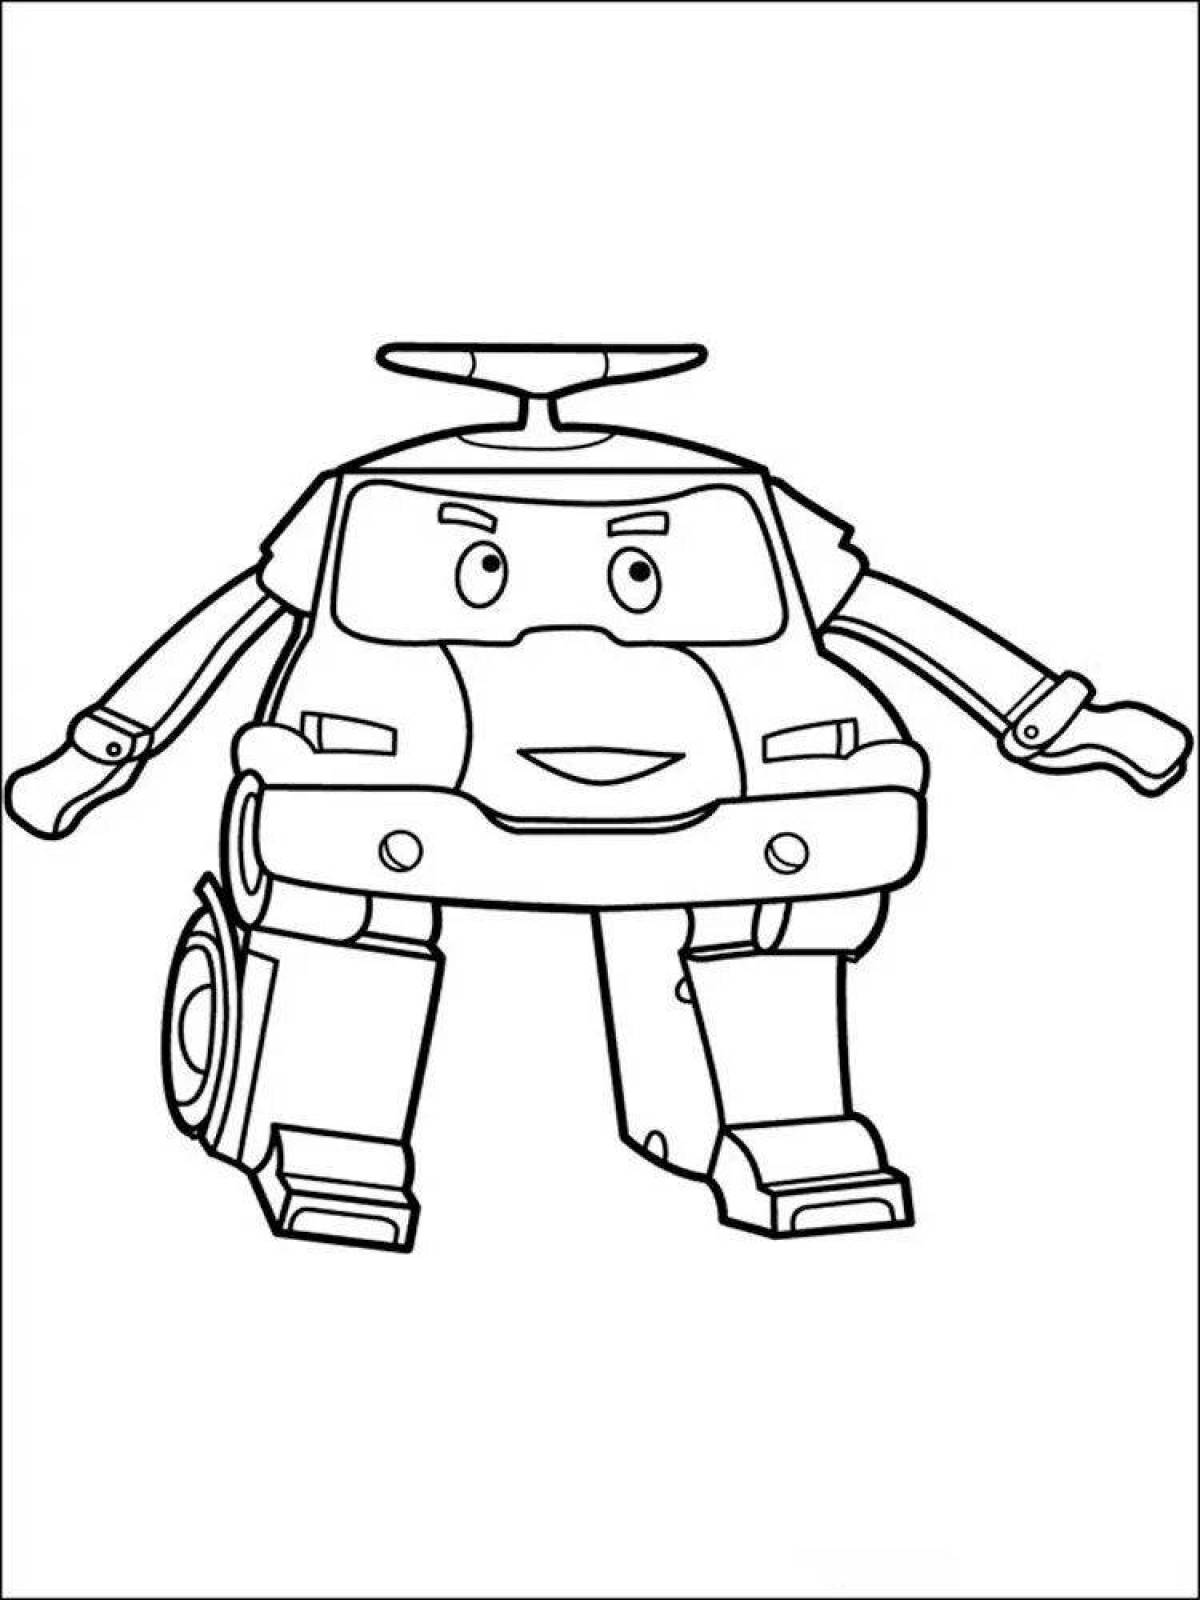 Coloring book bright robot poly